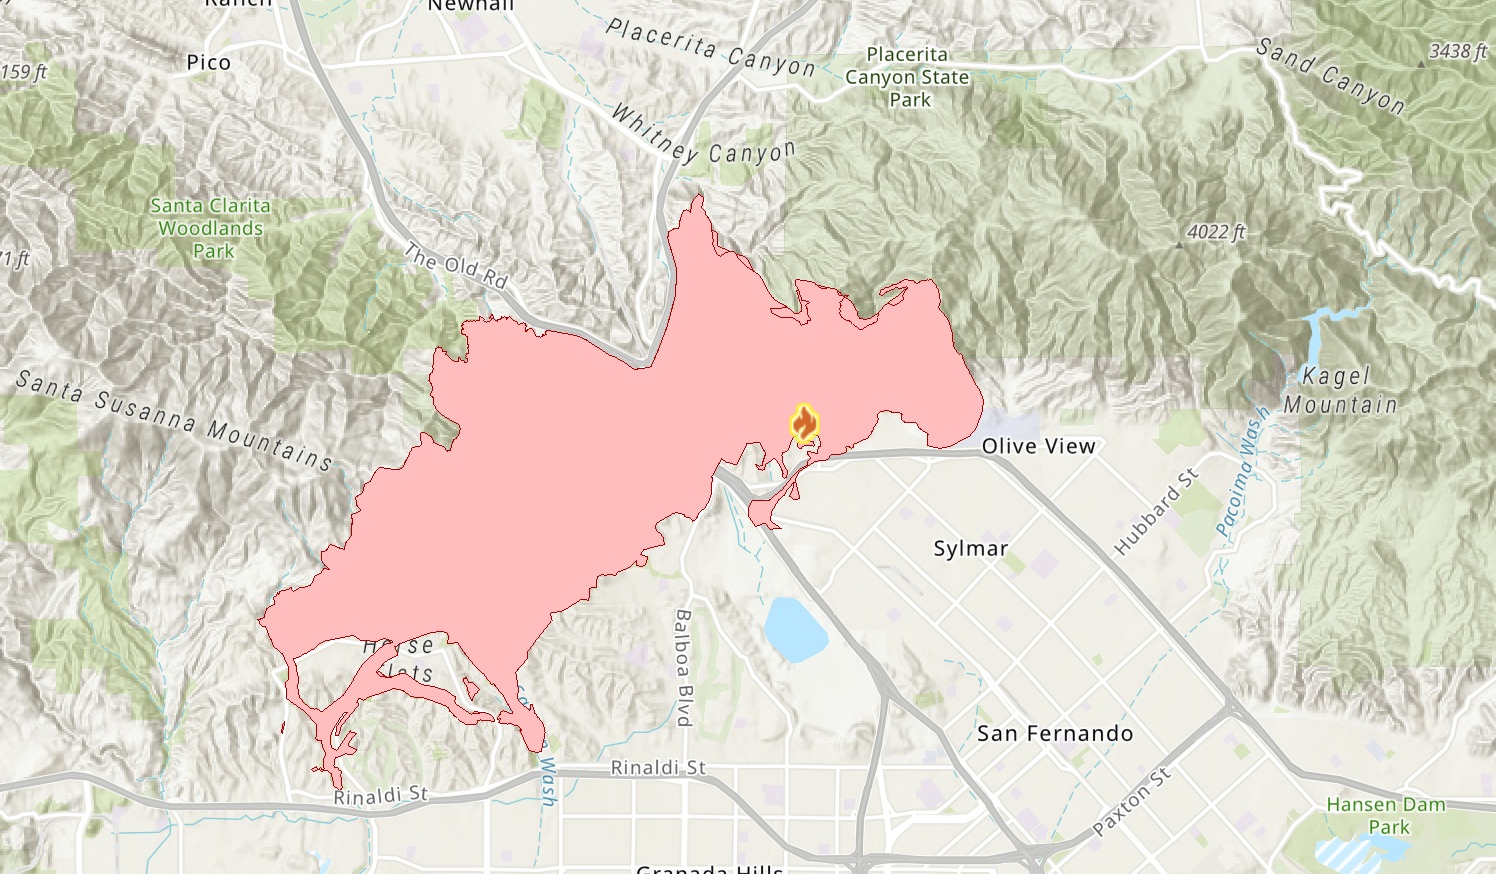 The Saddle Ridge Fire in Los Angeles County burned through 8,800 acres and killed one person. (Cal Fire)